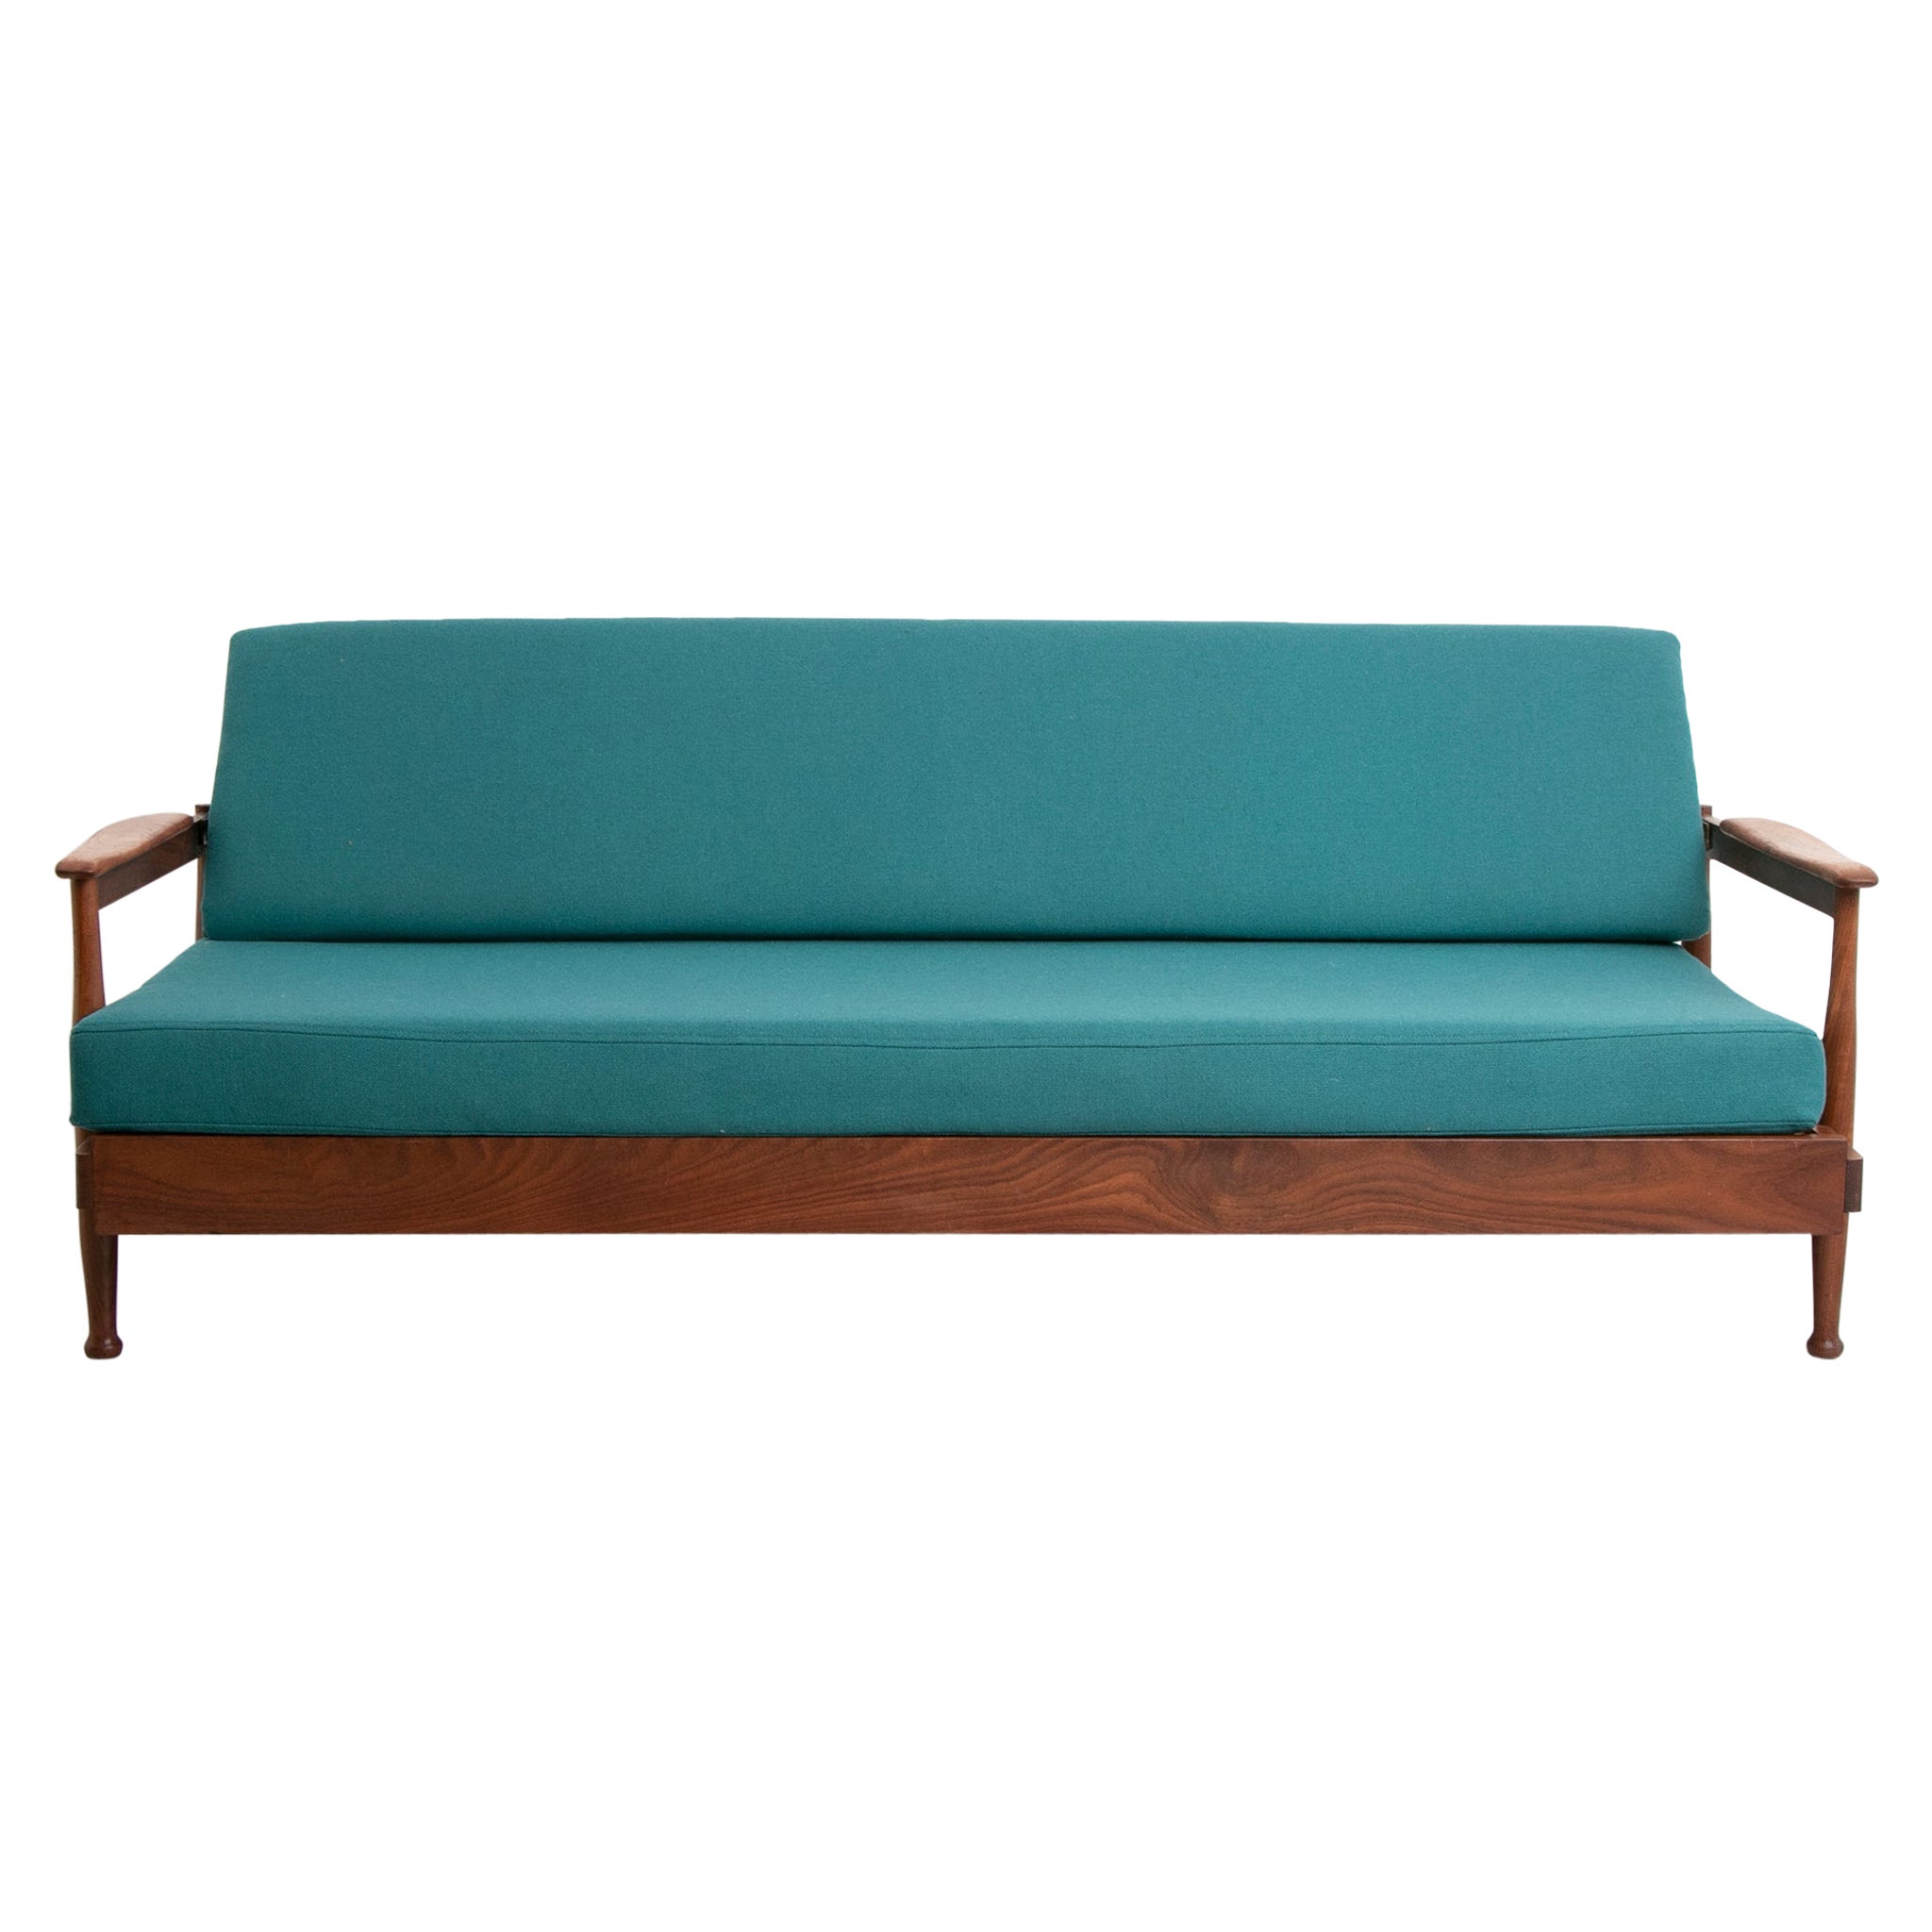 Midcentury Teak & Afrormosia Day Bed by Guy Rogers c.1960